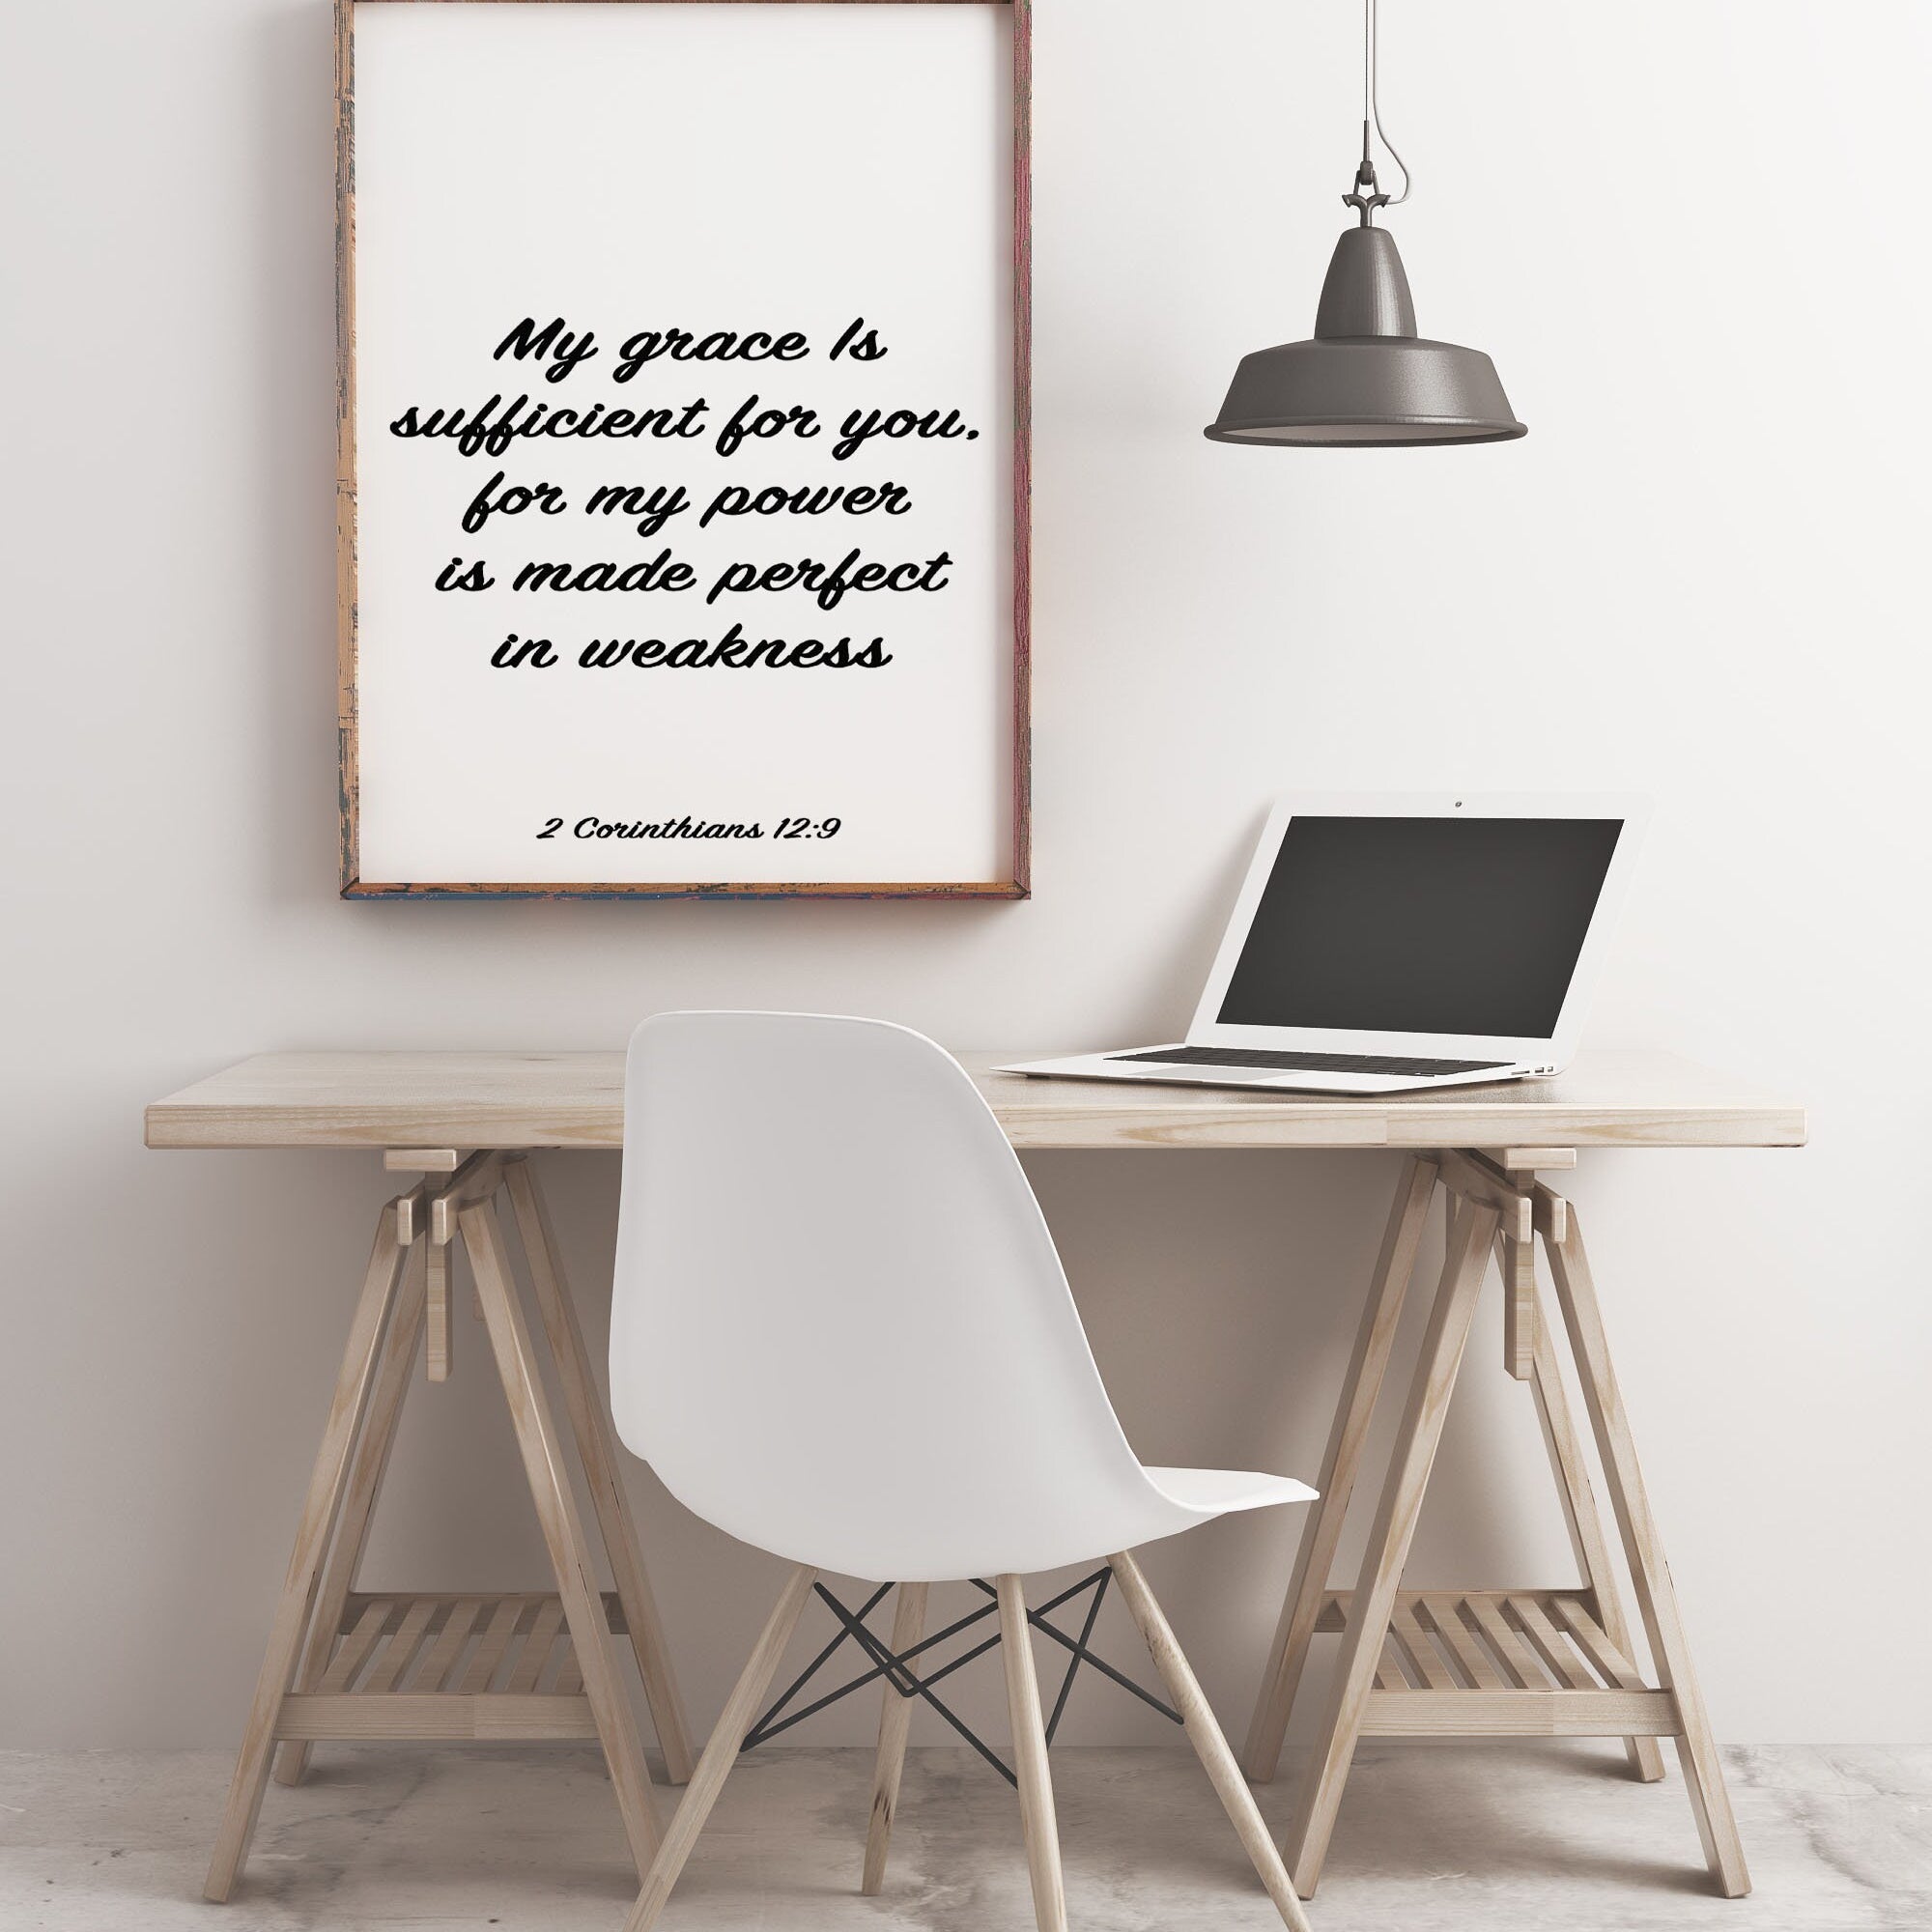 2 Corinthians 12:9 Quote Print, My Grace is Sufficient Wall Art in Black & White